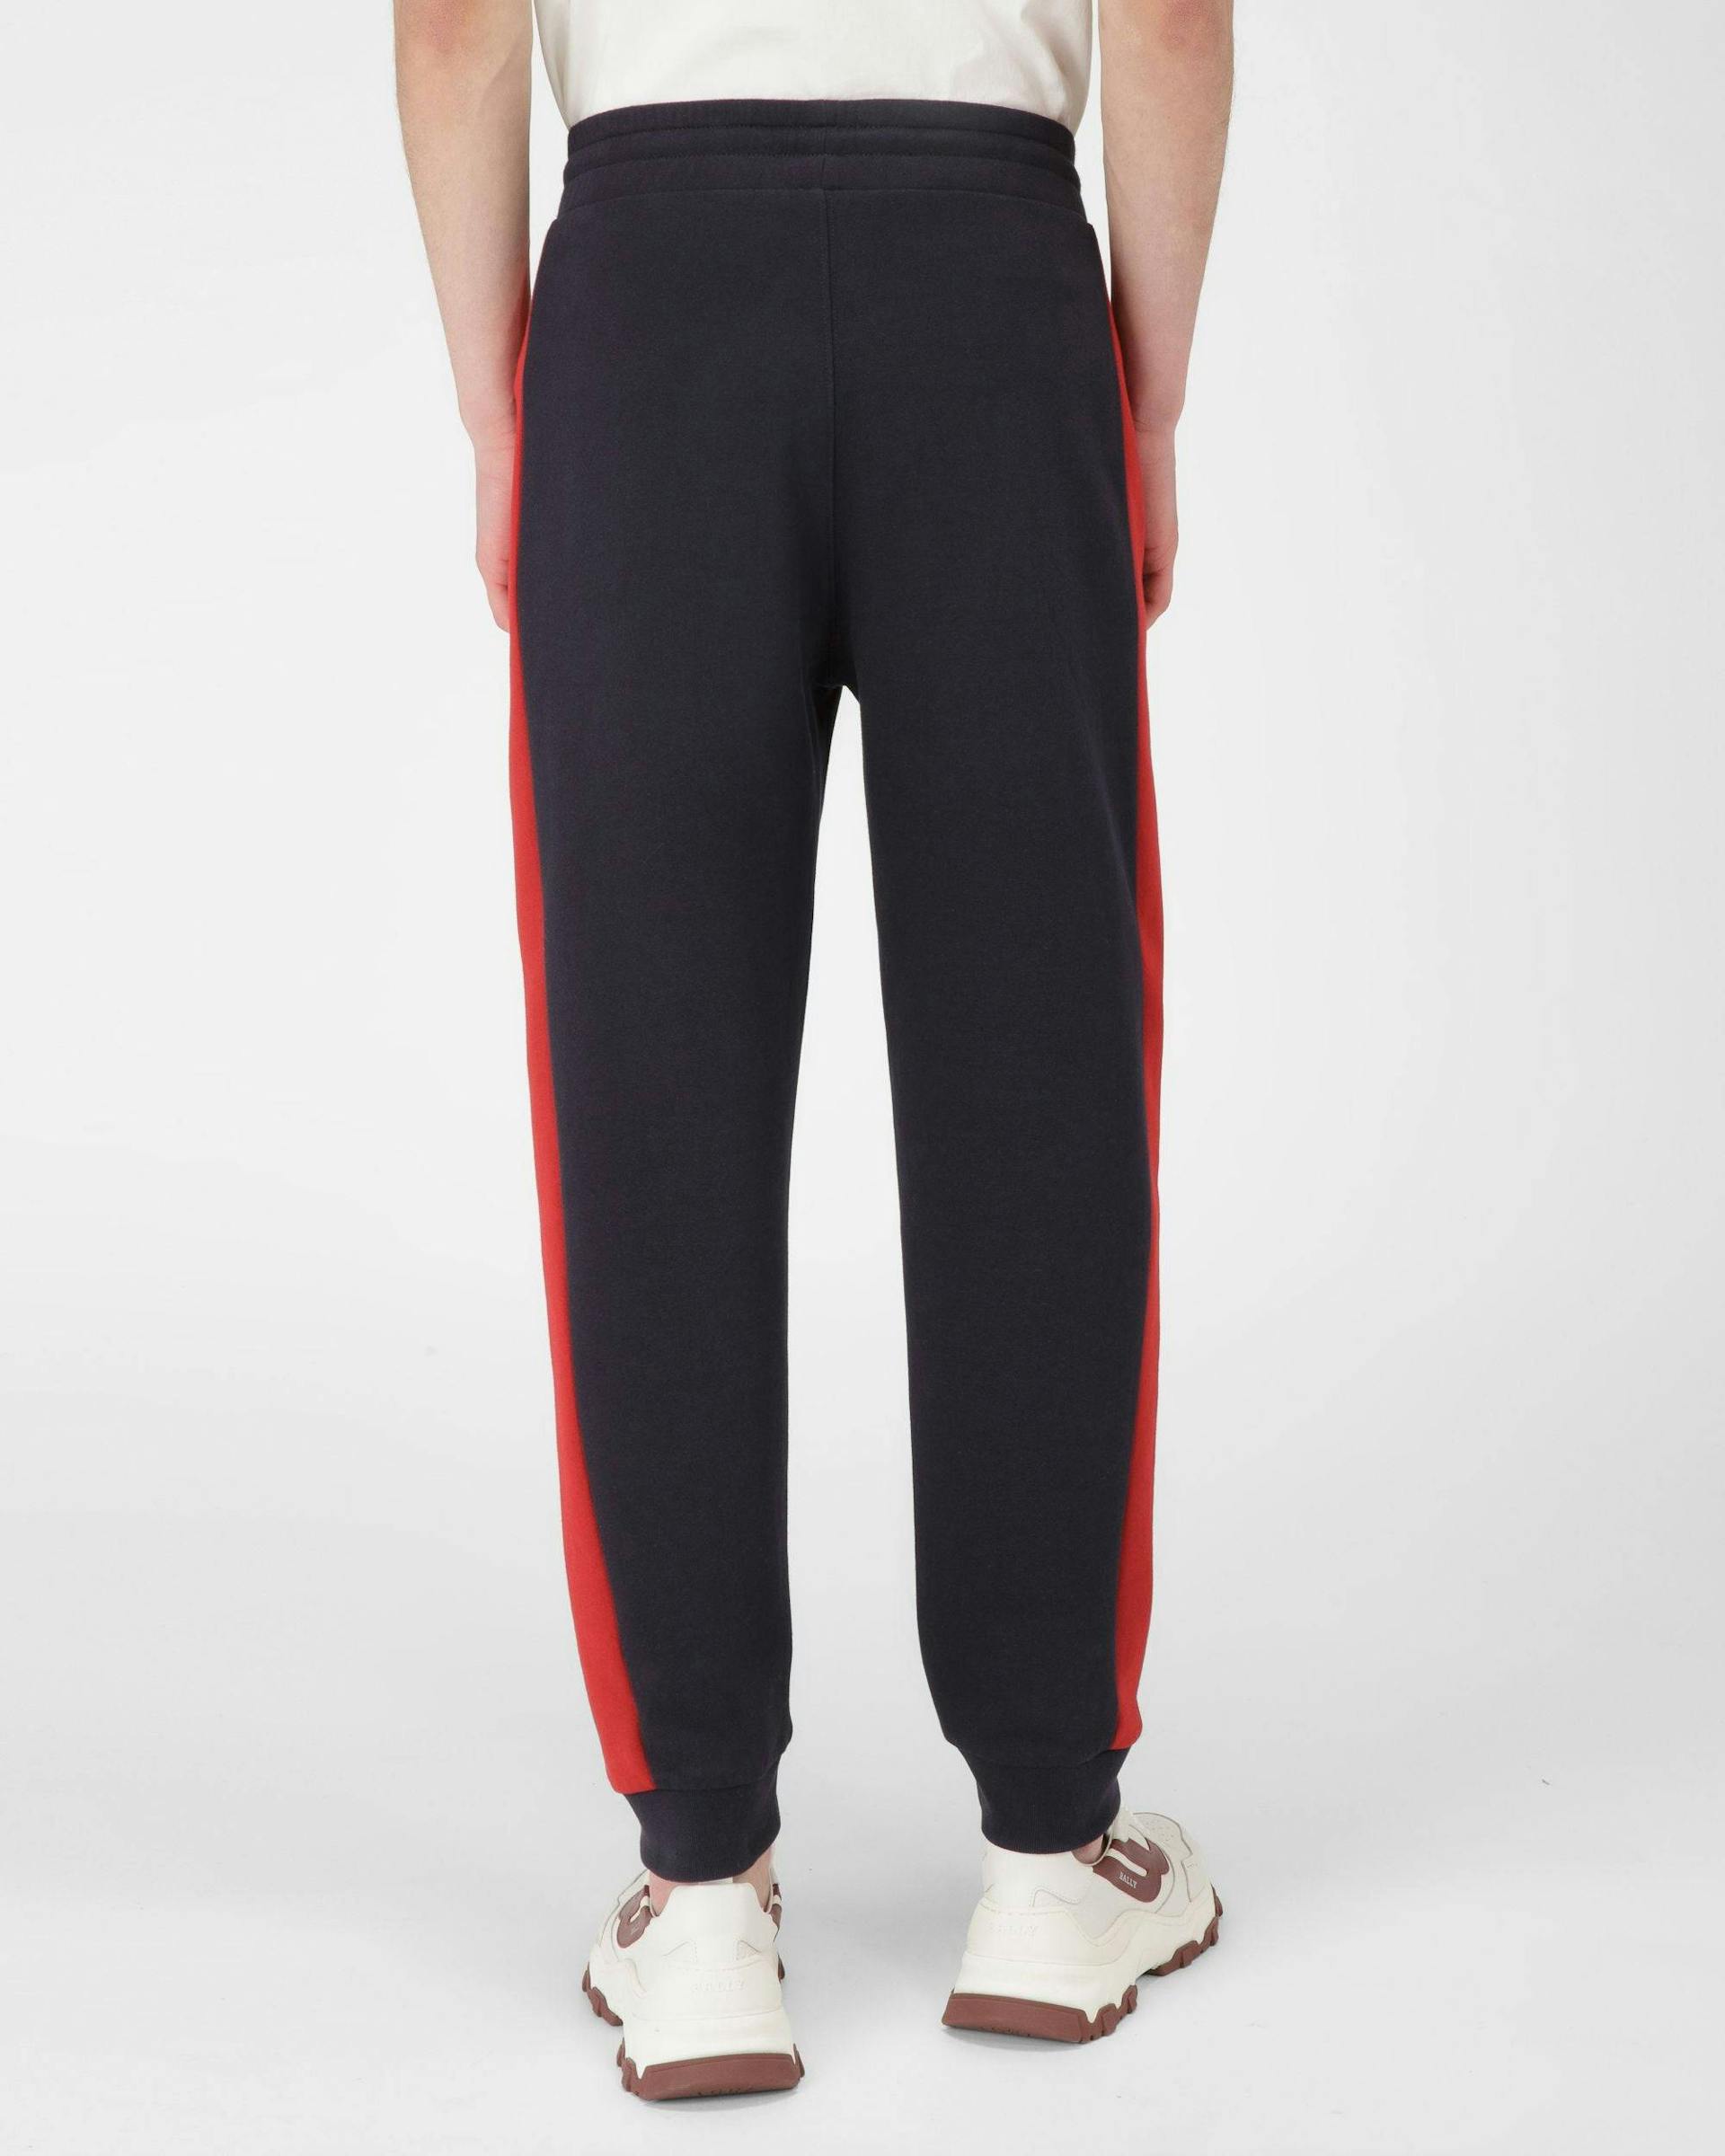 Techno Cotton Trousers In Navy & Bally Red - Men's - Bally - 05